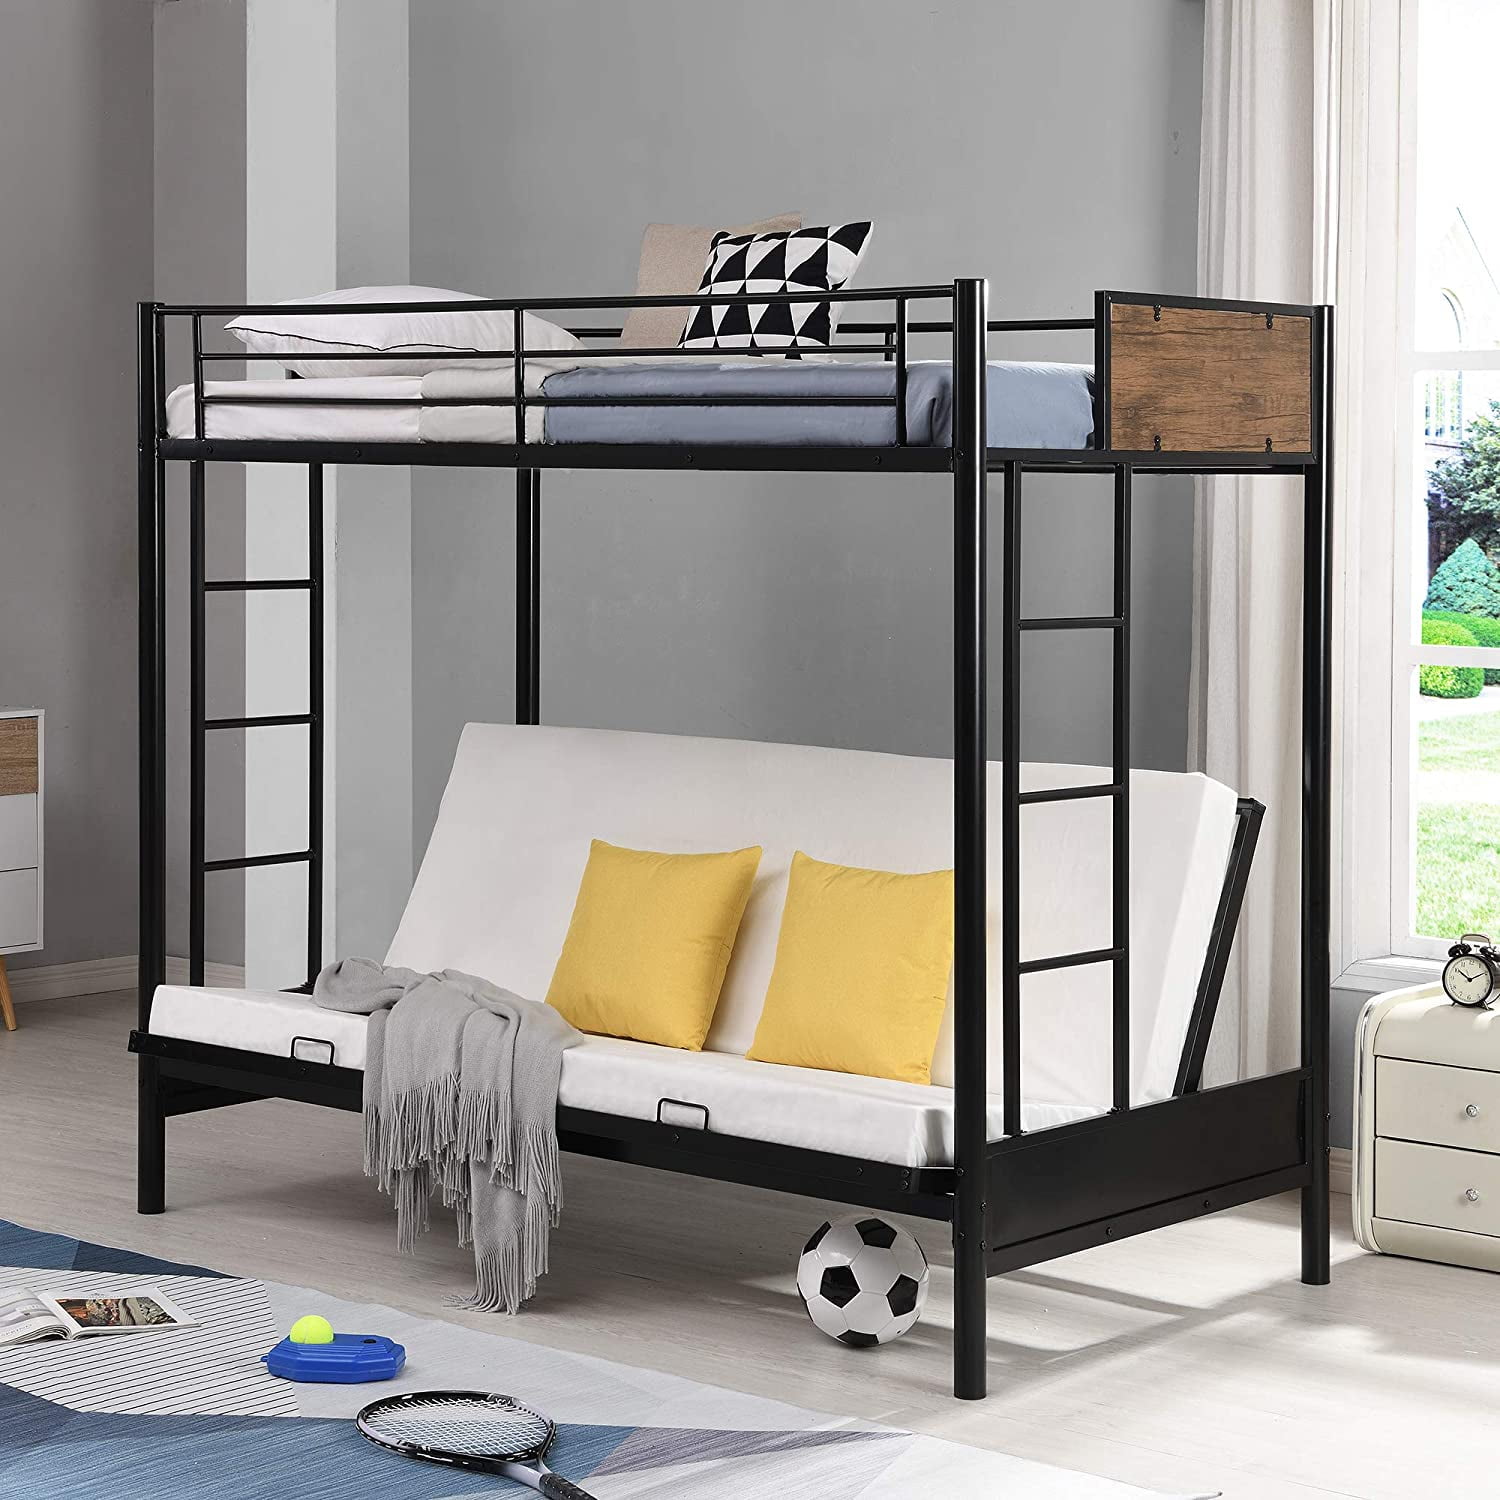 Piscis Convertible Twin Over Futon Bed, Bunk Bed W Futon Bottom